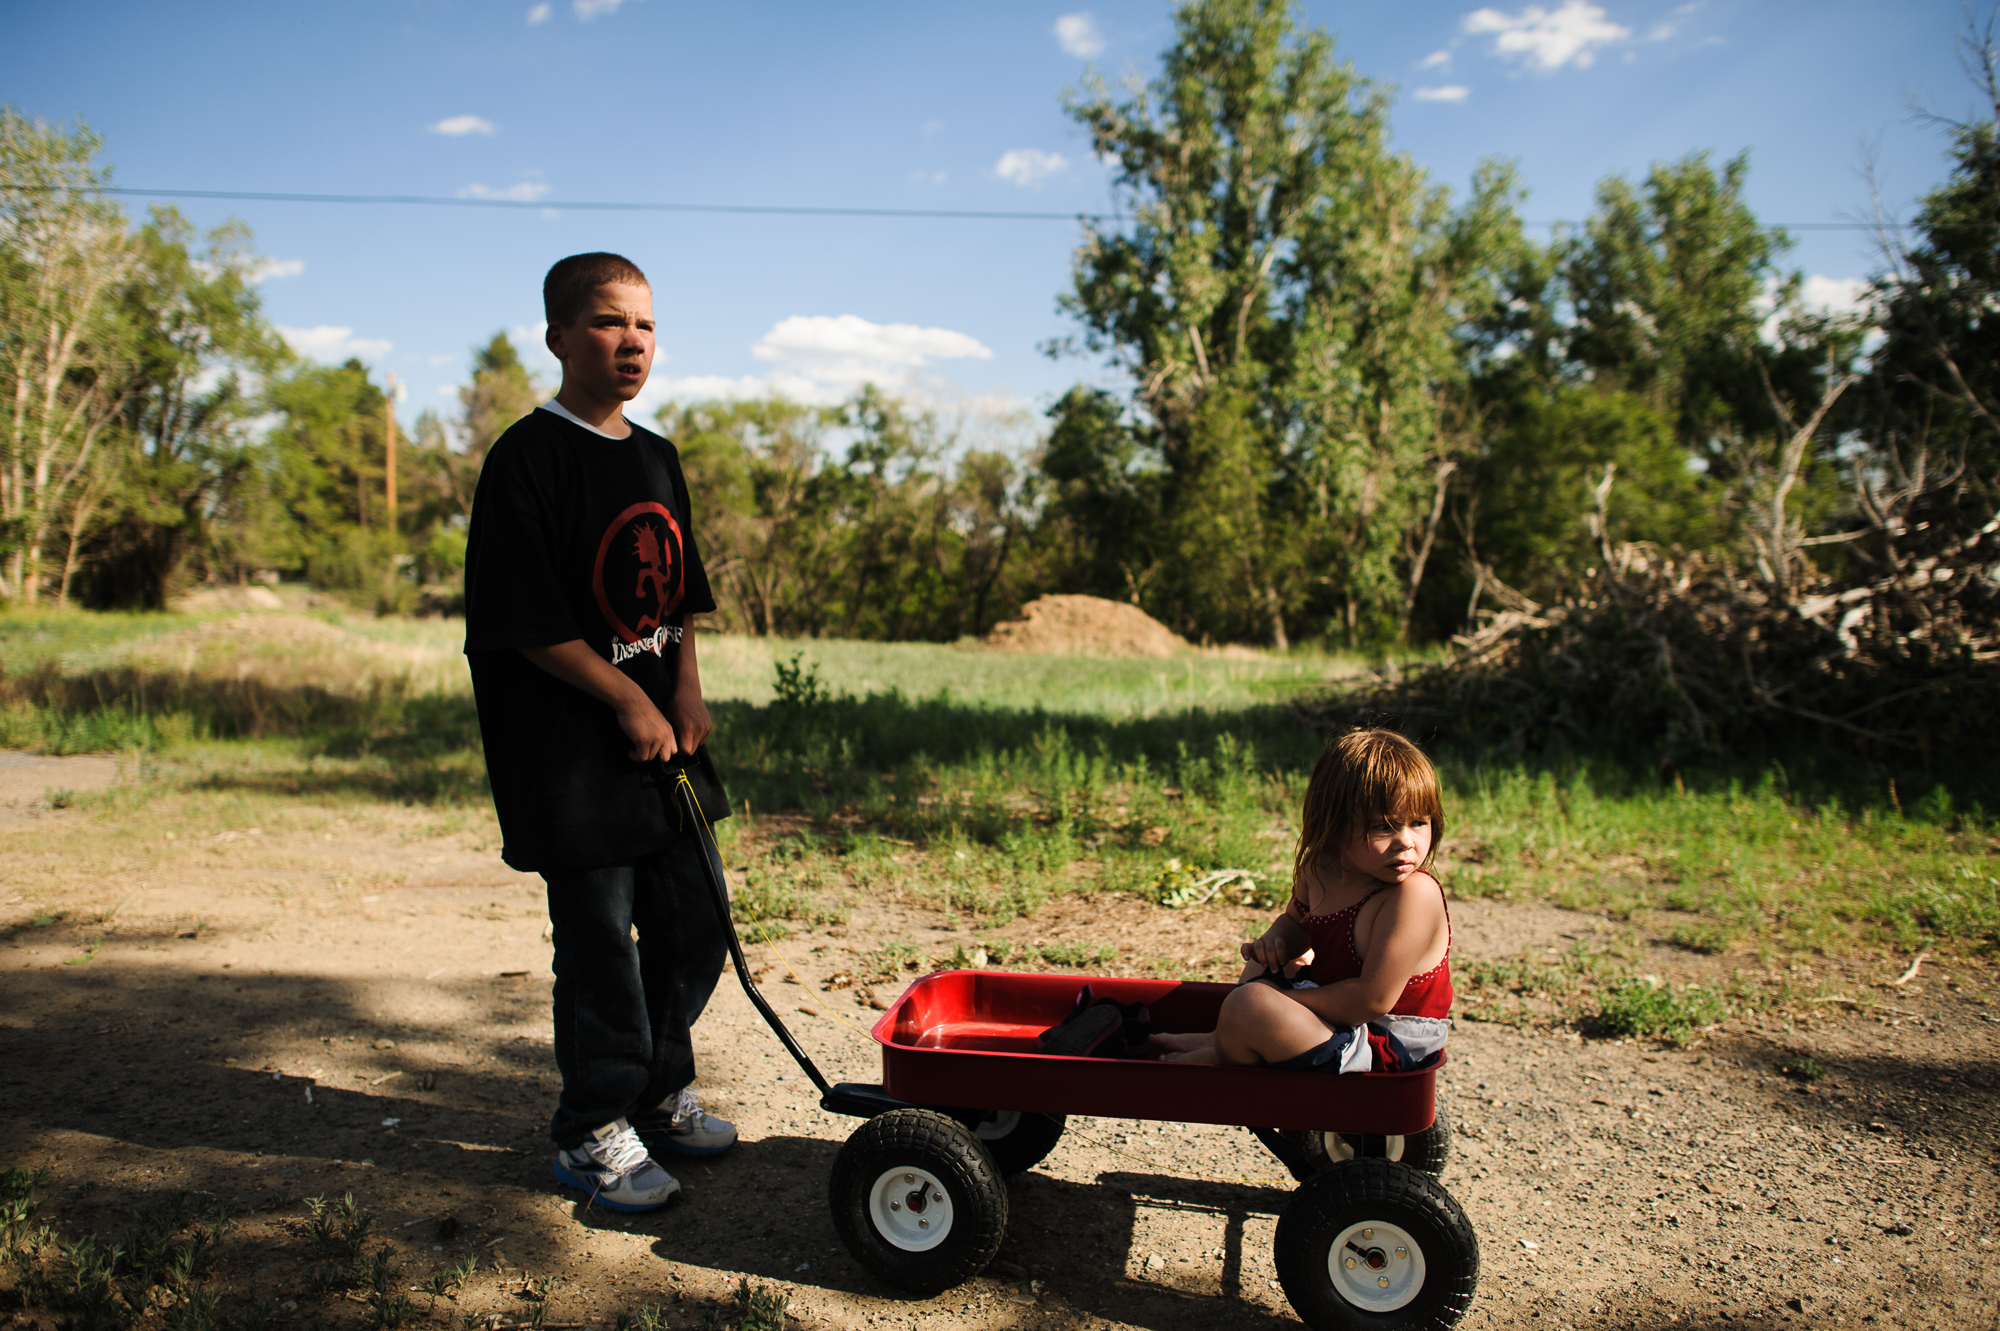  Vinny, age 13, pulls Elycia in a wheelbarrow during a family visit, 2012. 